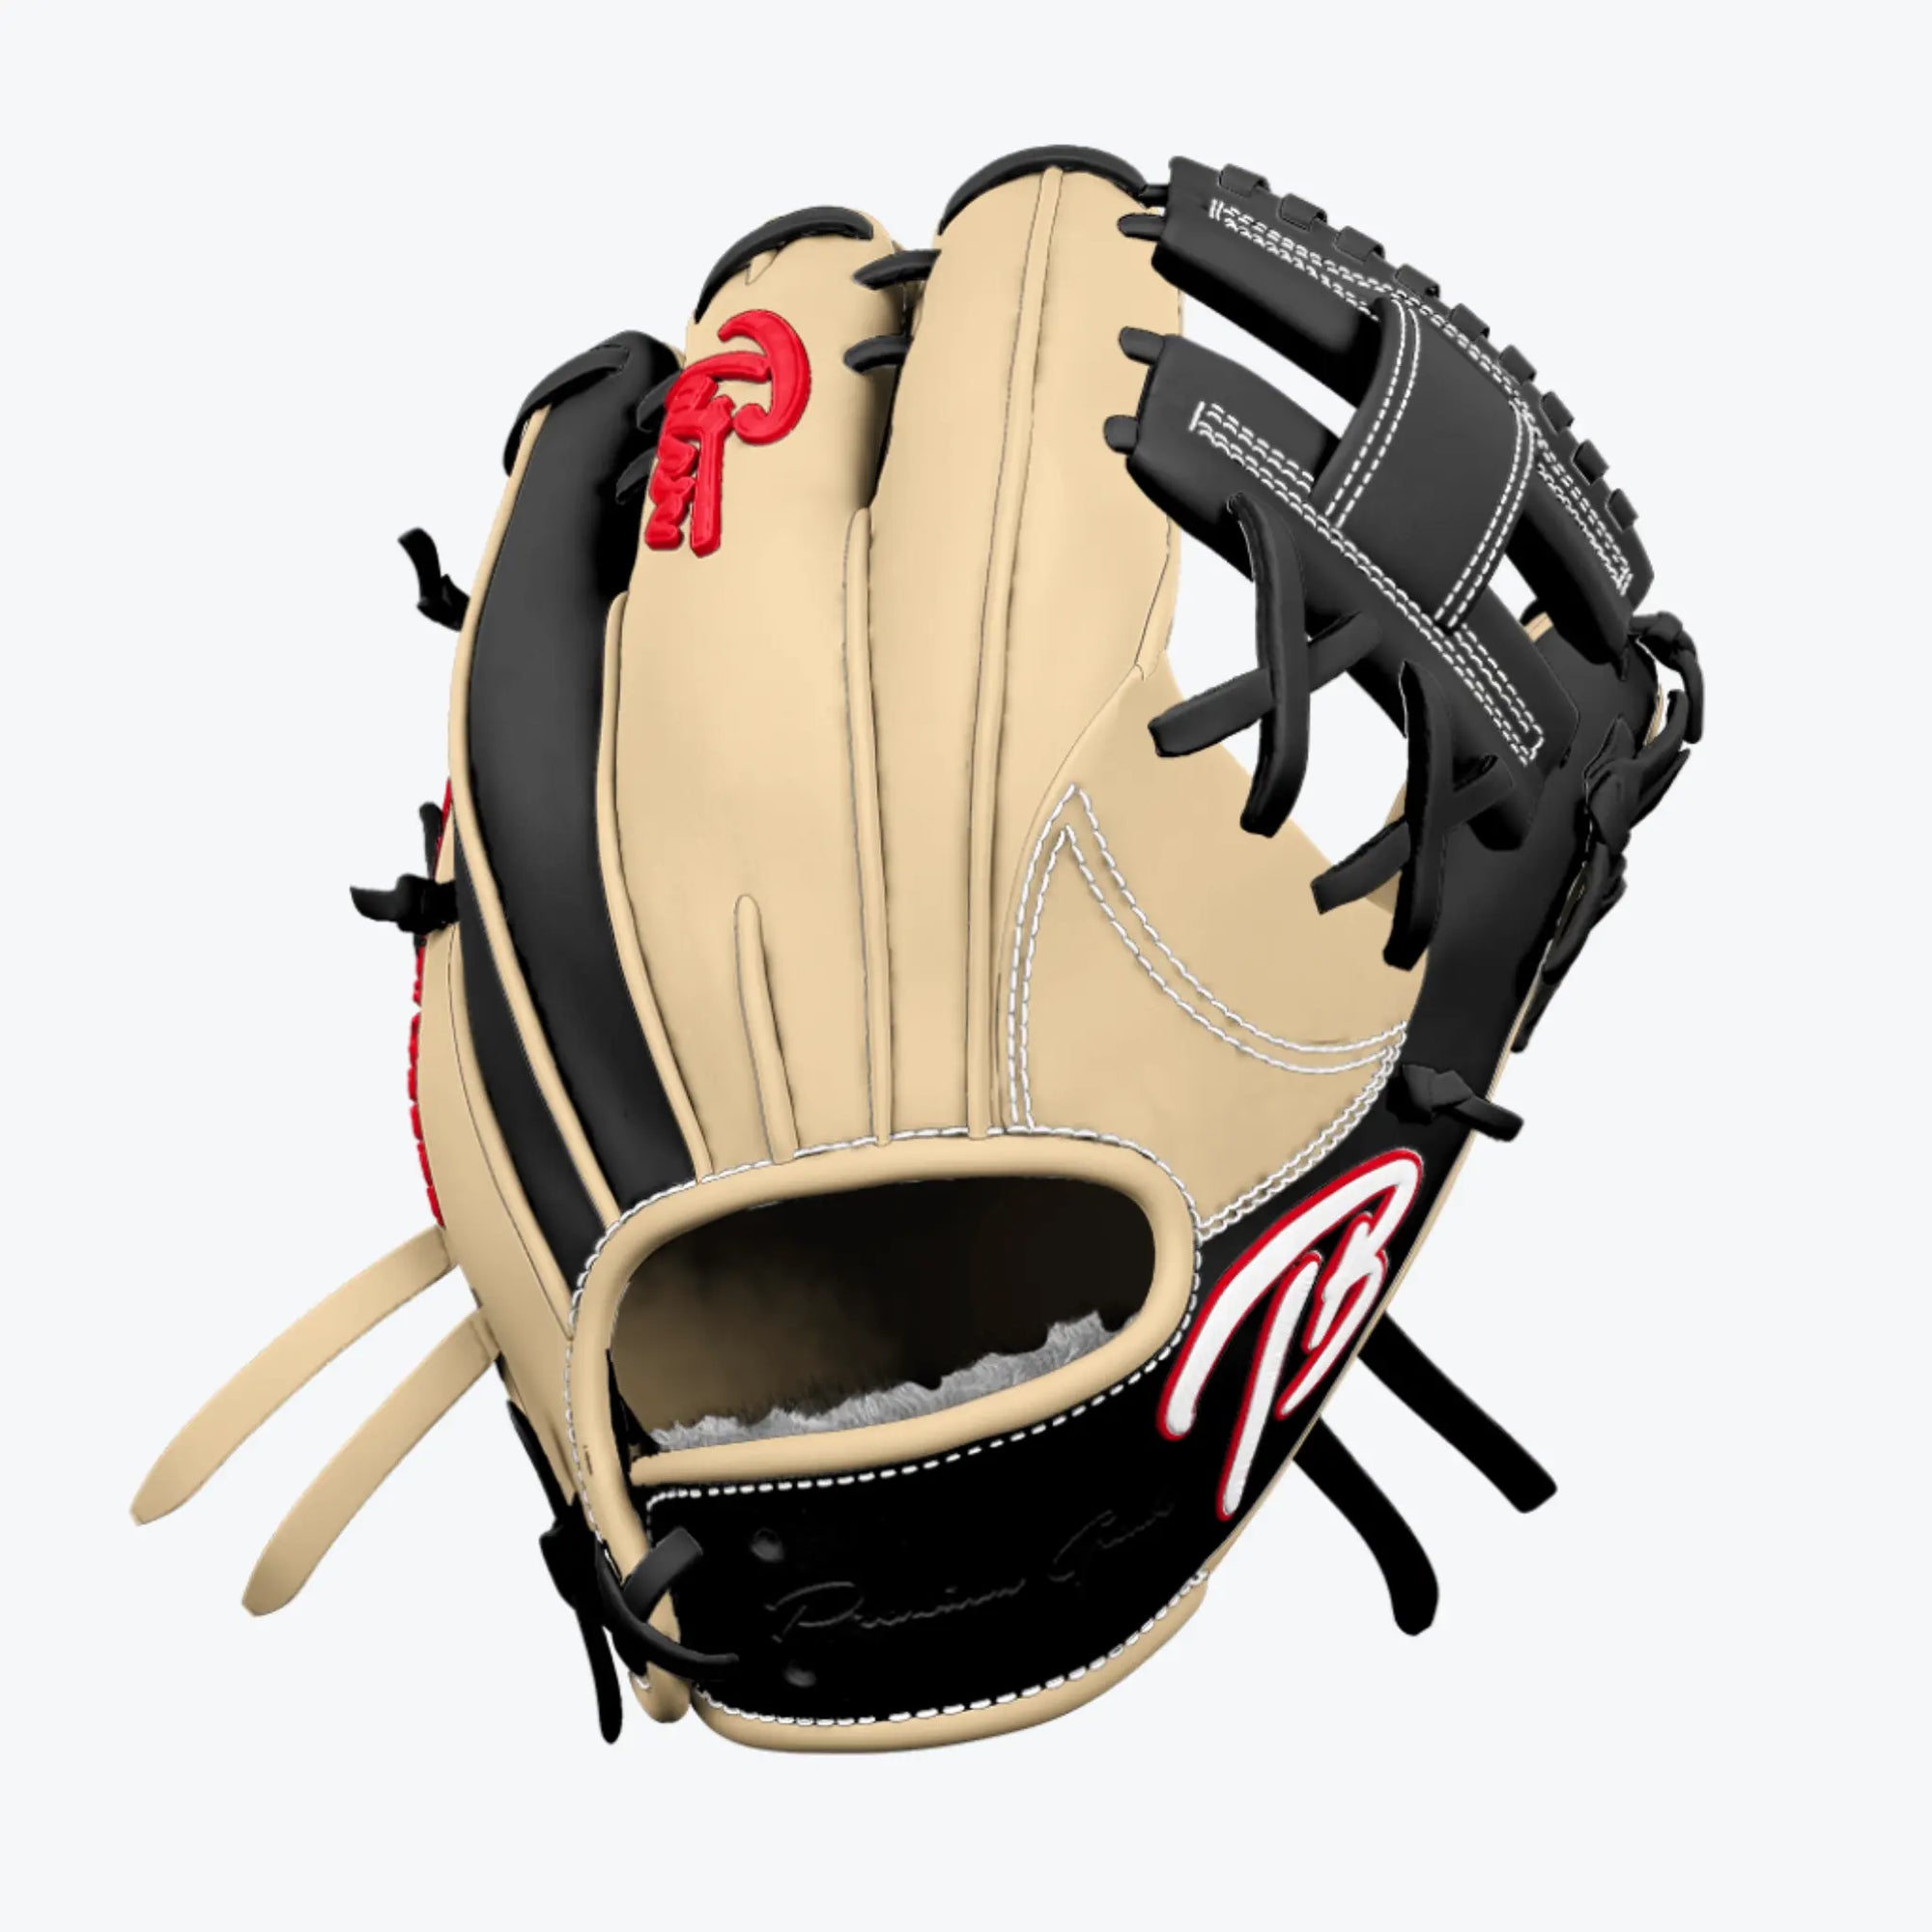 Top view of an I-Web Infield baseball glove. Primairly in black and blonde with various red accent colors on the 